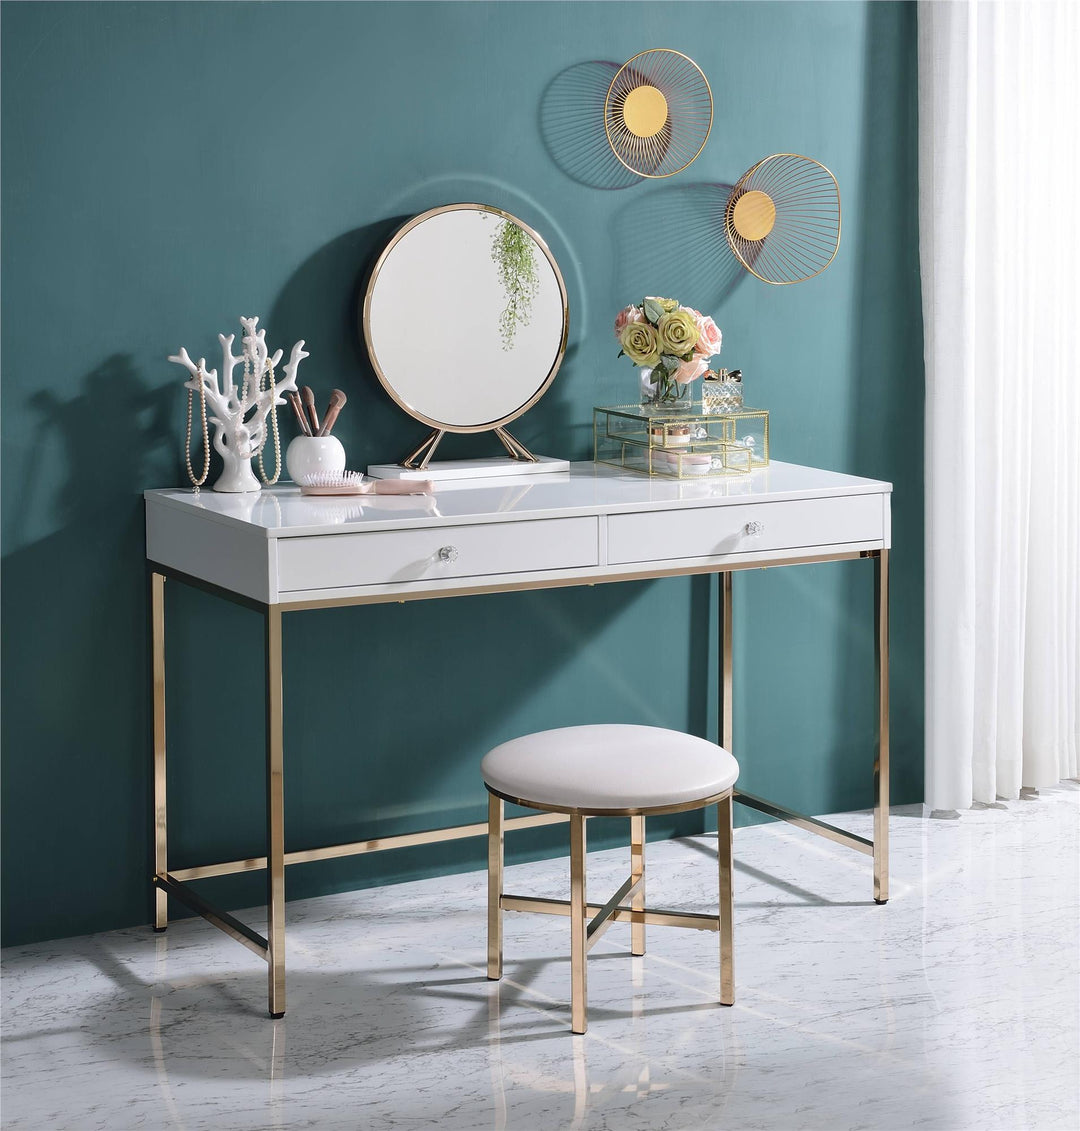 Vanity mirror sets with coordinating stools Midriaks -  Champagne Gold